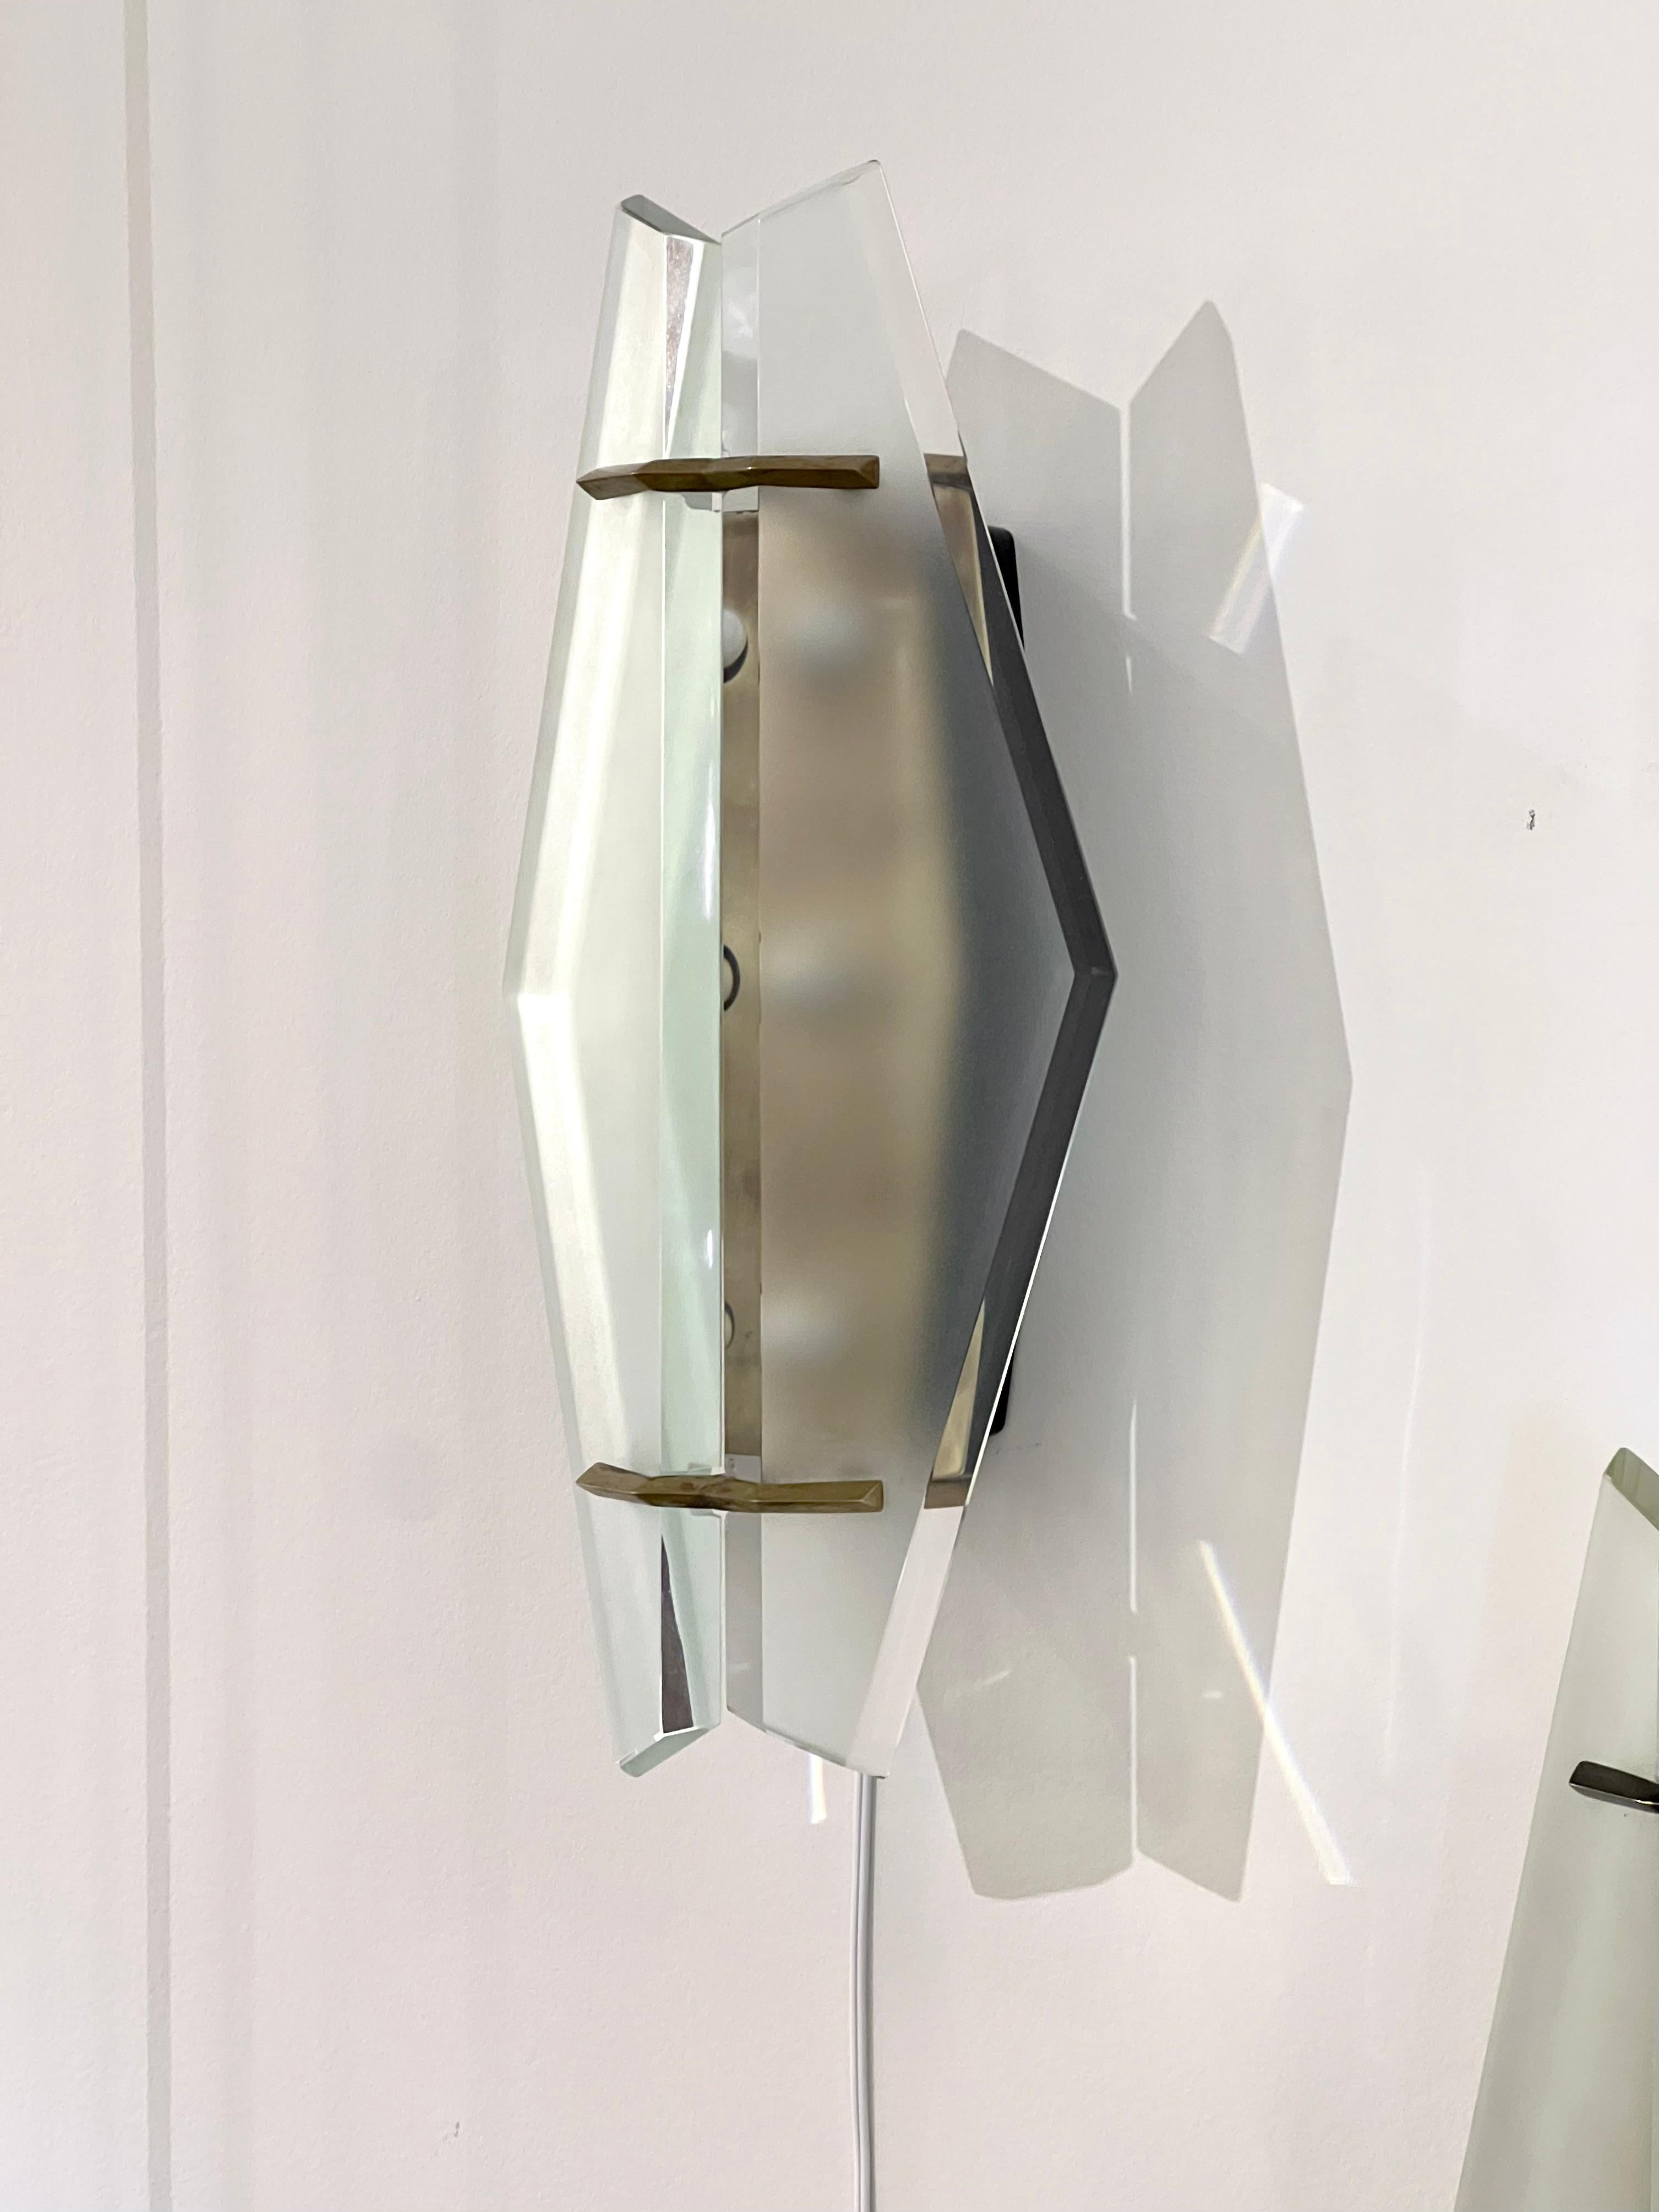 Pair of modernist sconces by Max Ingrand for Fontana Arte, with thick diamond shaped glass plates, beveled edge, held by brass mounts.